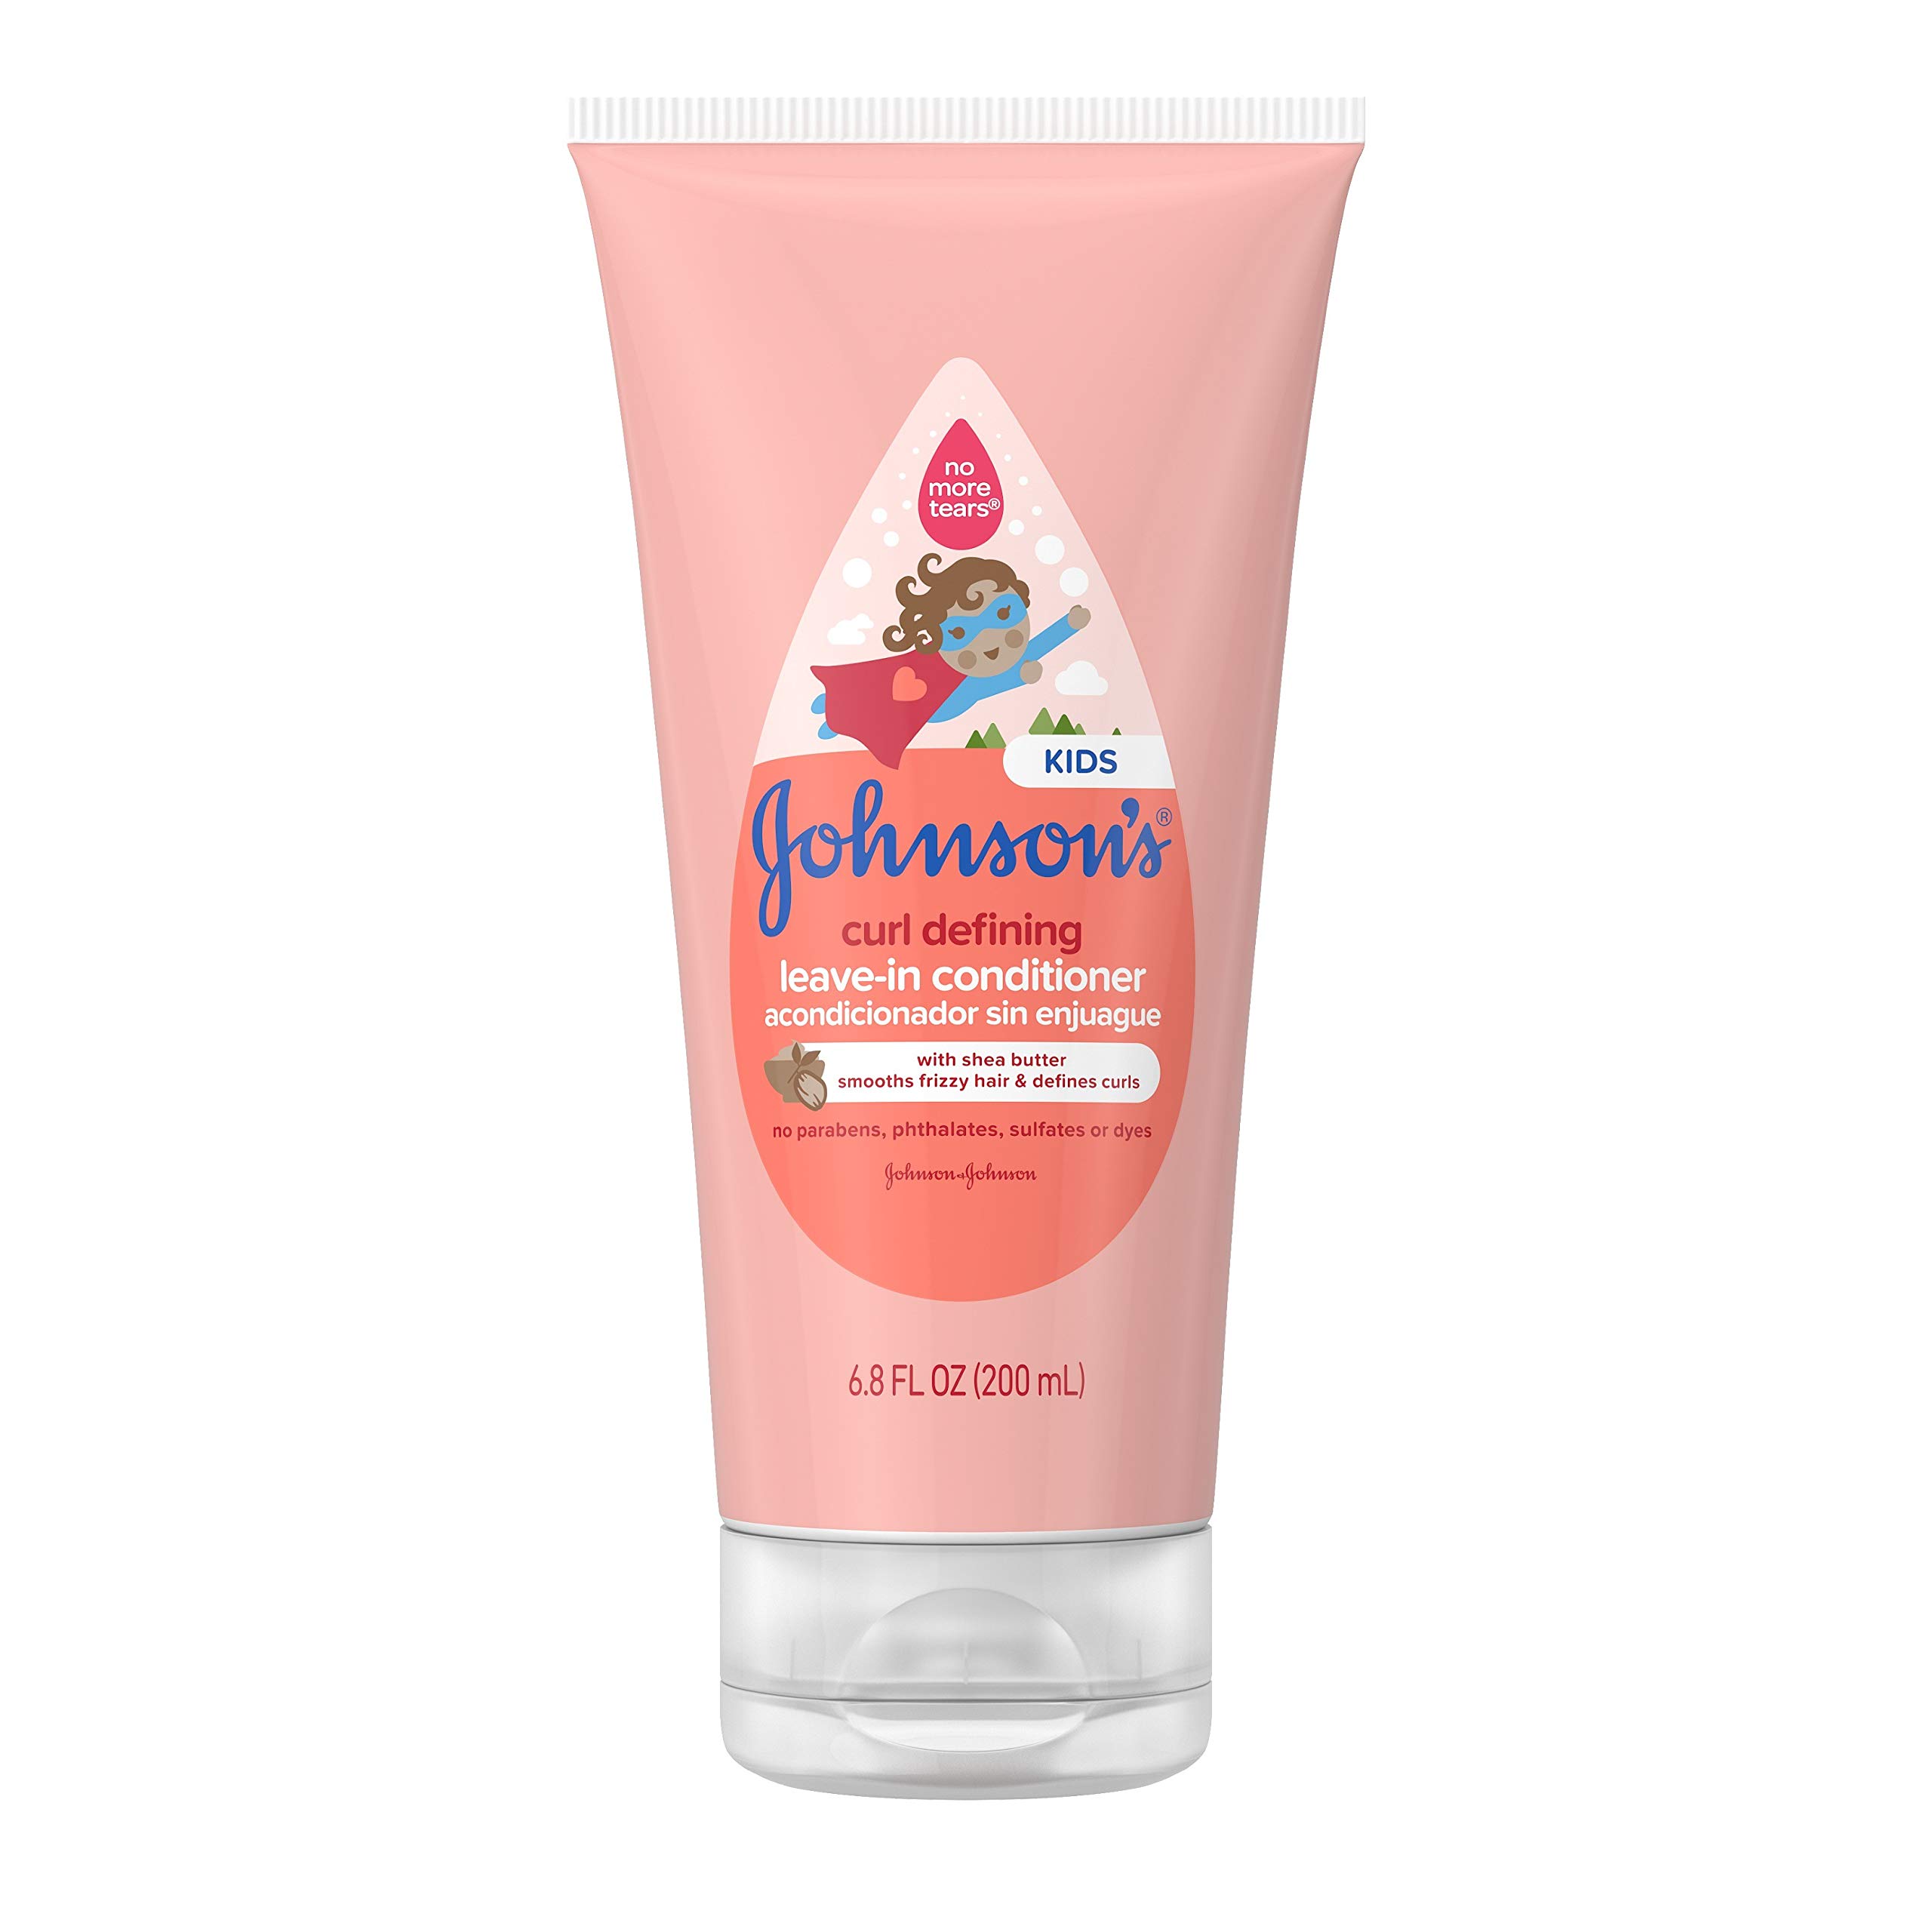 Johnson's Curl Defining Tear-Free Kids' Leave-in Conditioner with Shea Butter, Paraben-, Sulfate- & Dye-Free Formula, Hypoallergenic & Gentle for Toddlers' Hair, 6.8 fl. Oz